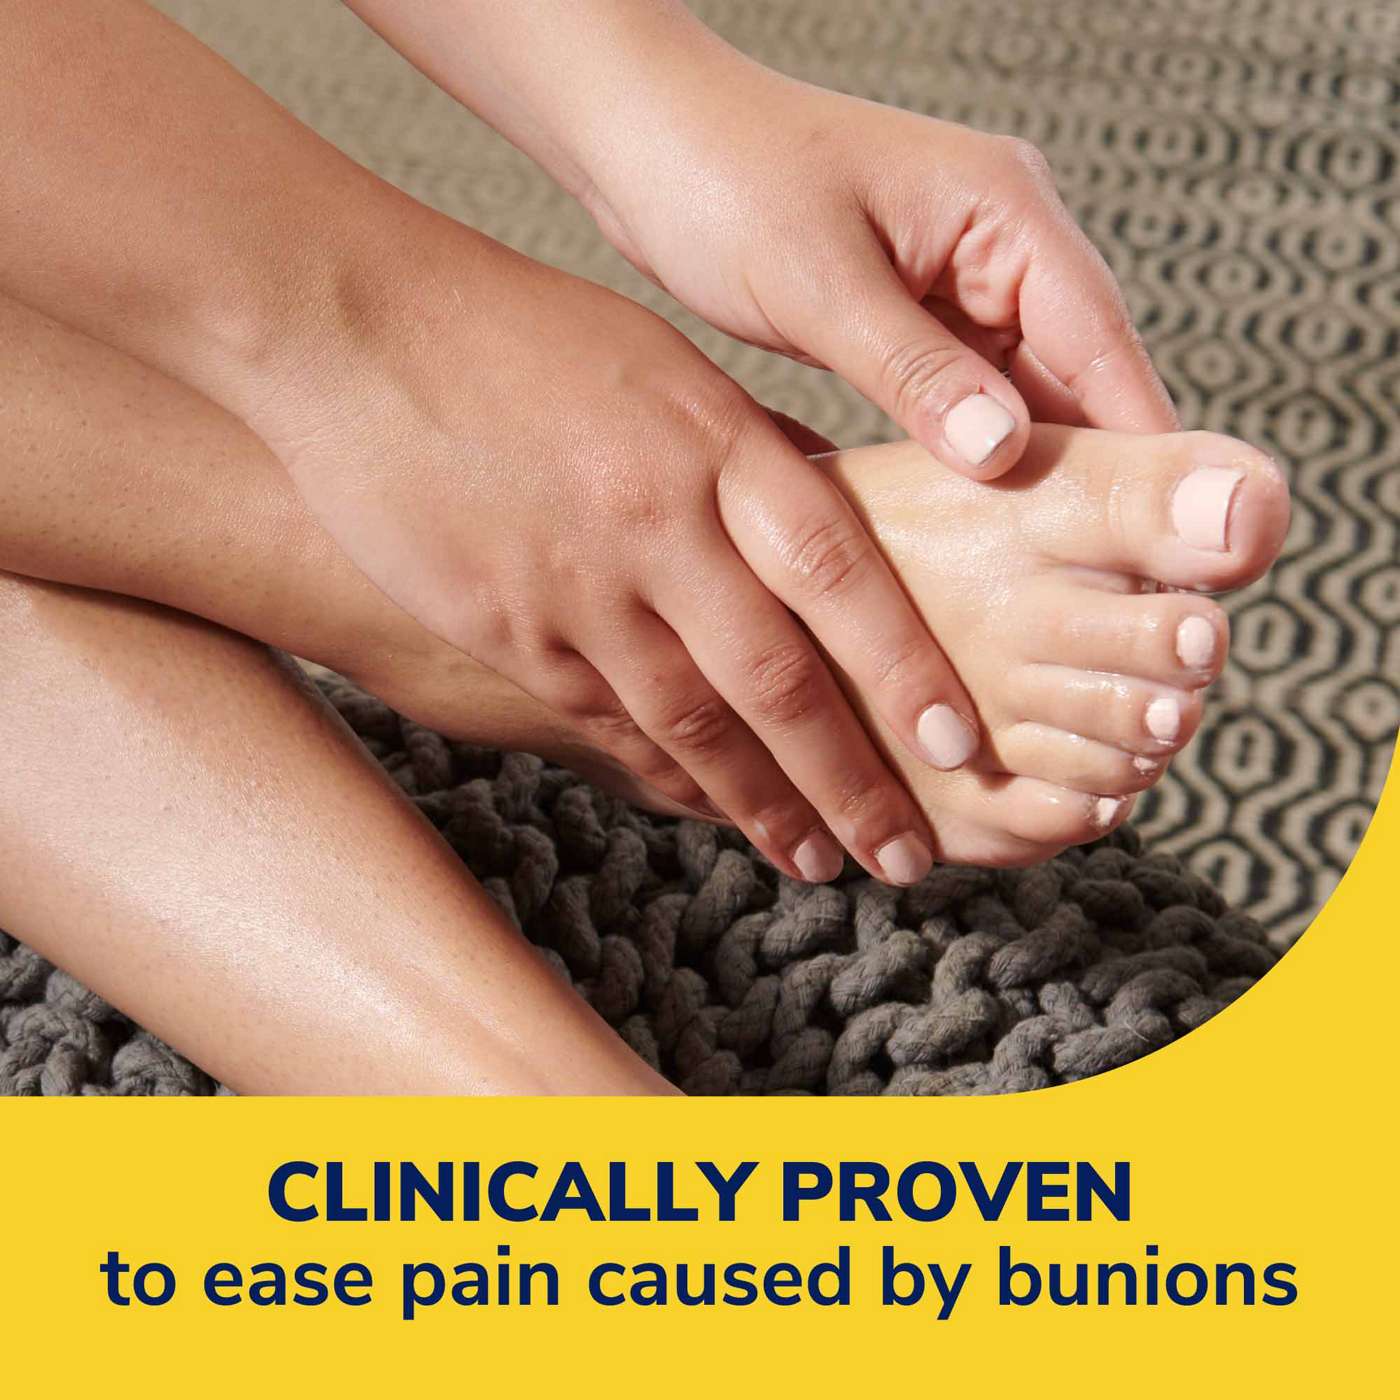 Dr. Scholl's Bunion Cushions; image 5 of 9